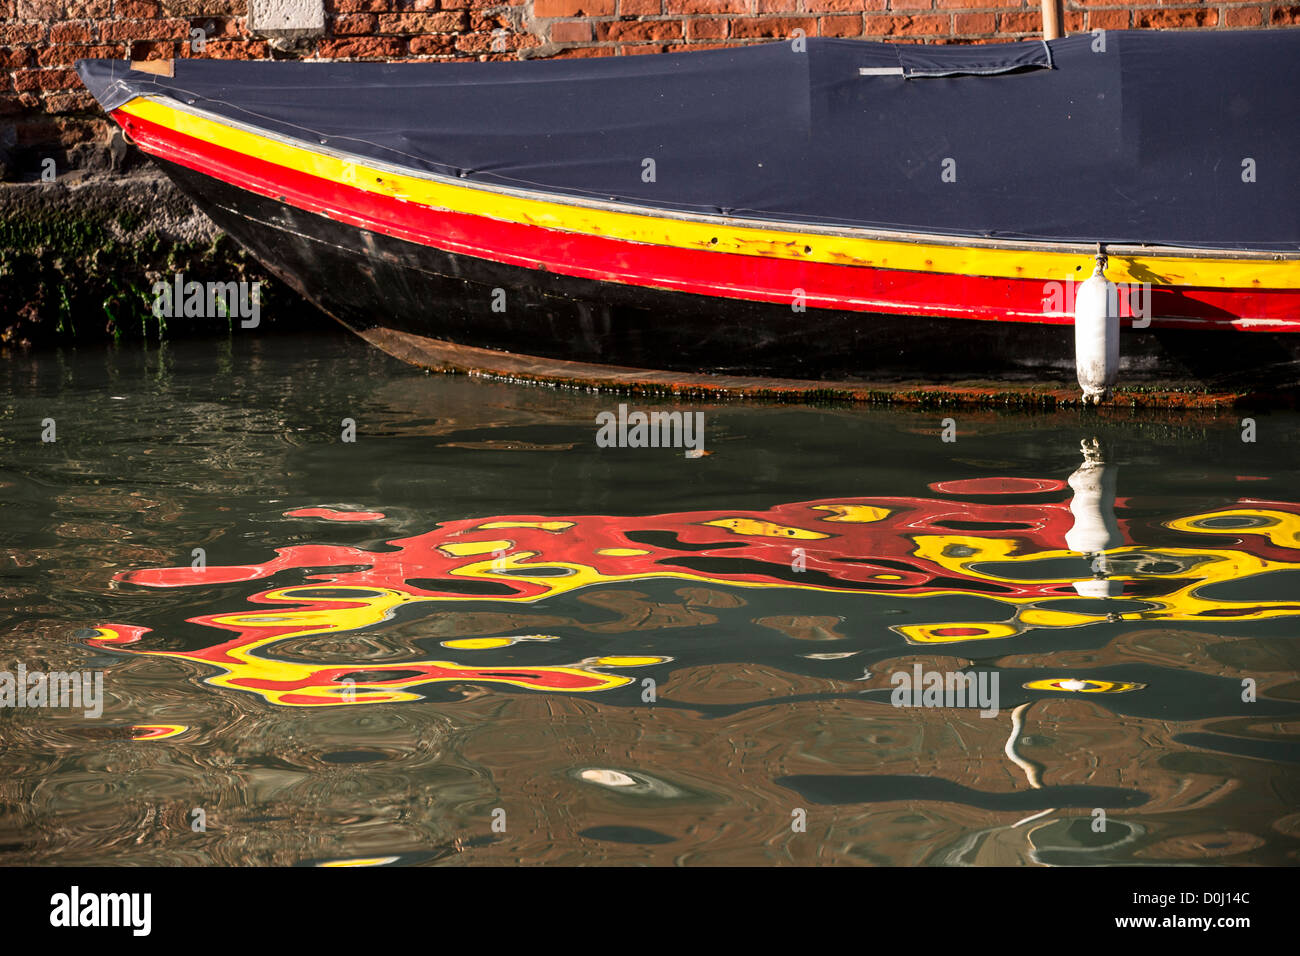 Detail of the prow of a small boat painted in the colours of the German flag, and its distorted reflection in rippling water Stock Photo